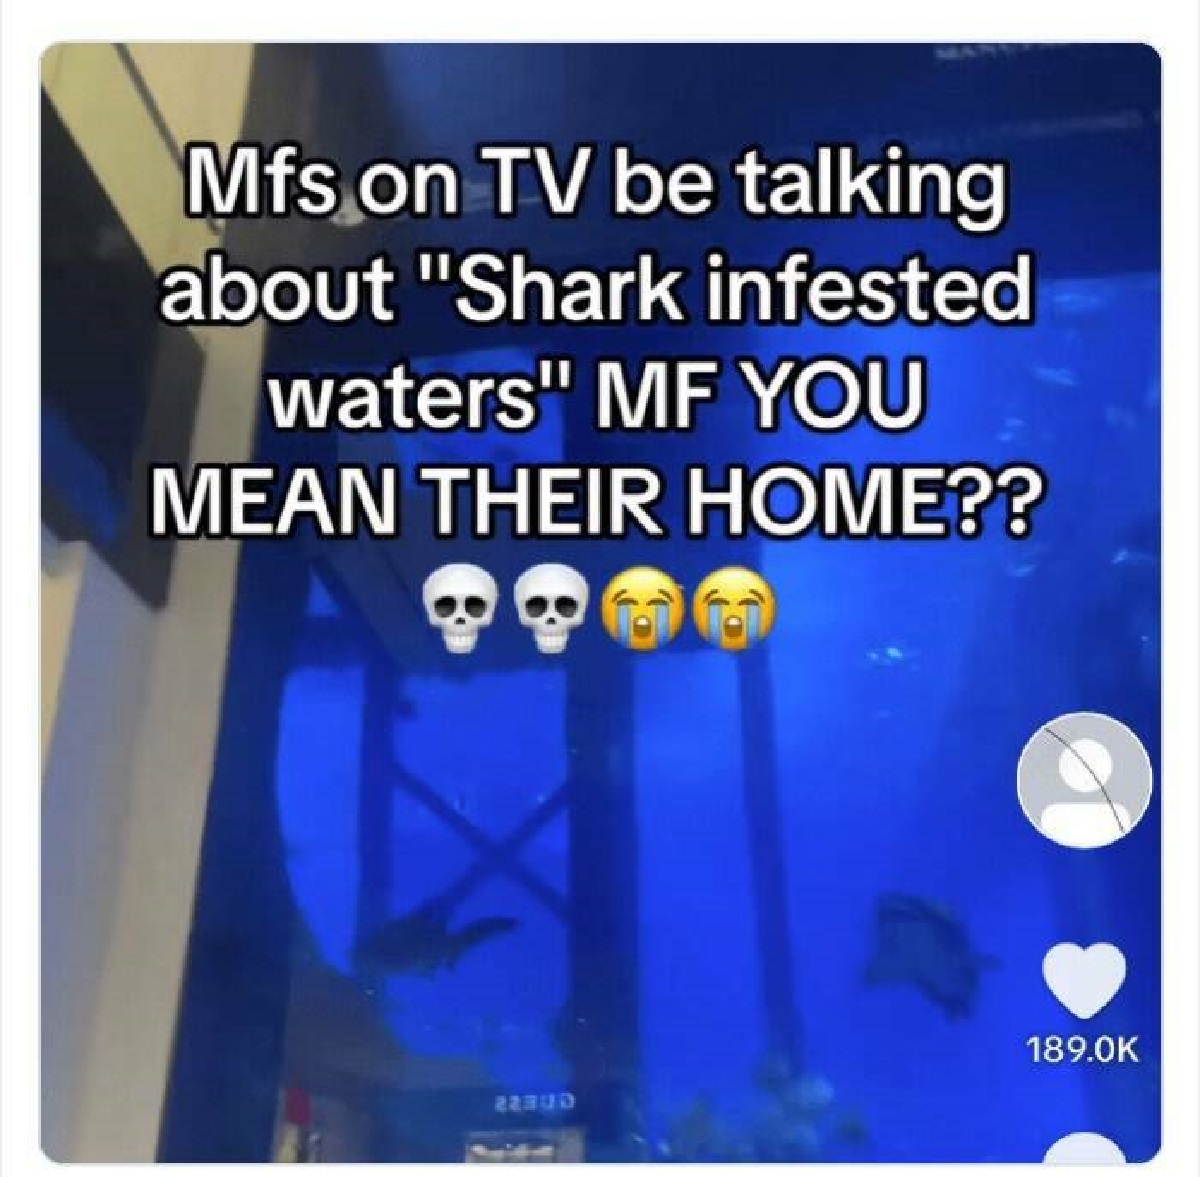 screenshot - Mfs on Tv be talking about "Shark infested waters" Mf You Mean Their Home?? 22UD